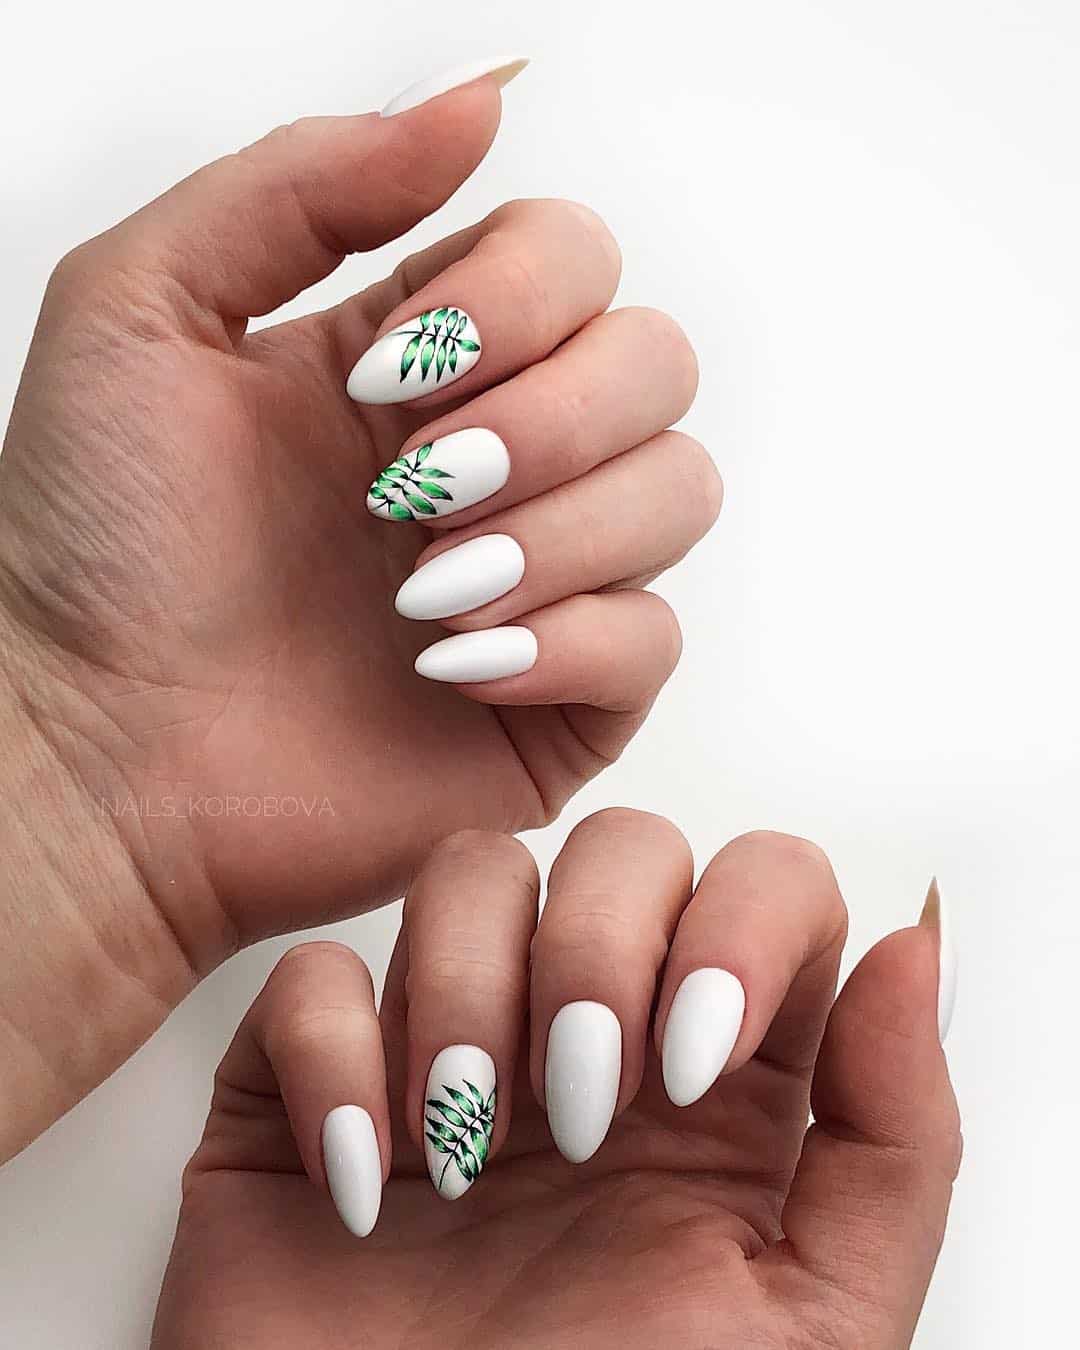 With 32 new, cool and trendy white acrylic nail designs, it's hard to pick just one! You'll be able to find the perfect design for any occasion with these new designs. Check out all of them now on Polish and Pearls! #whitenails #whitenaildesigns #whitenailart